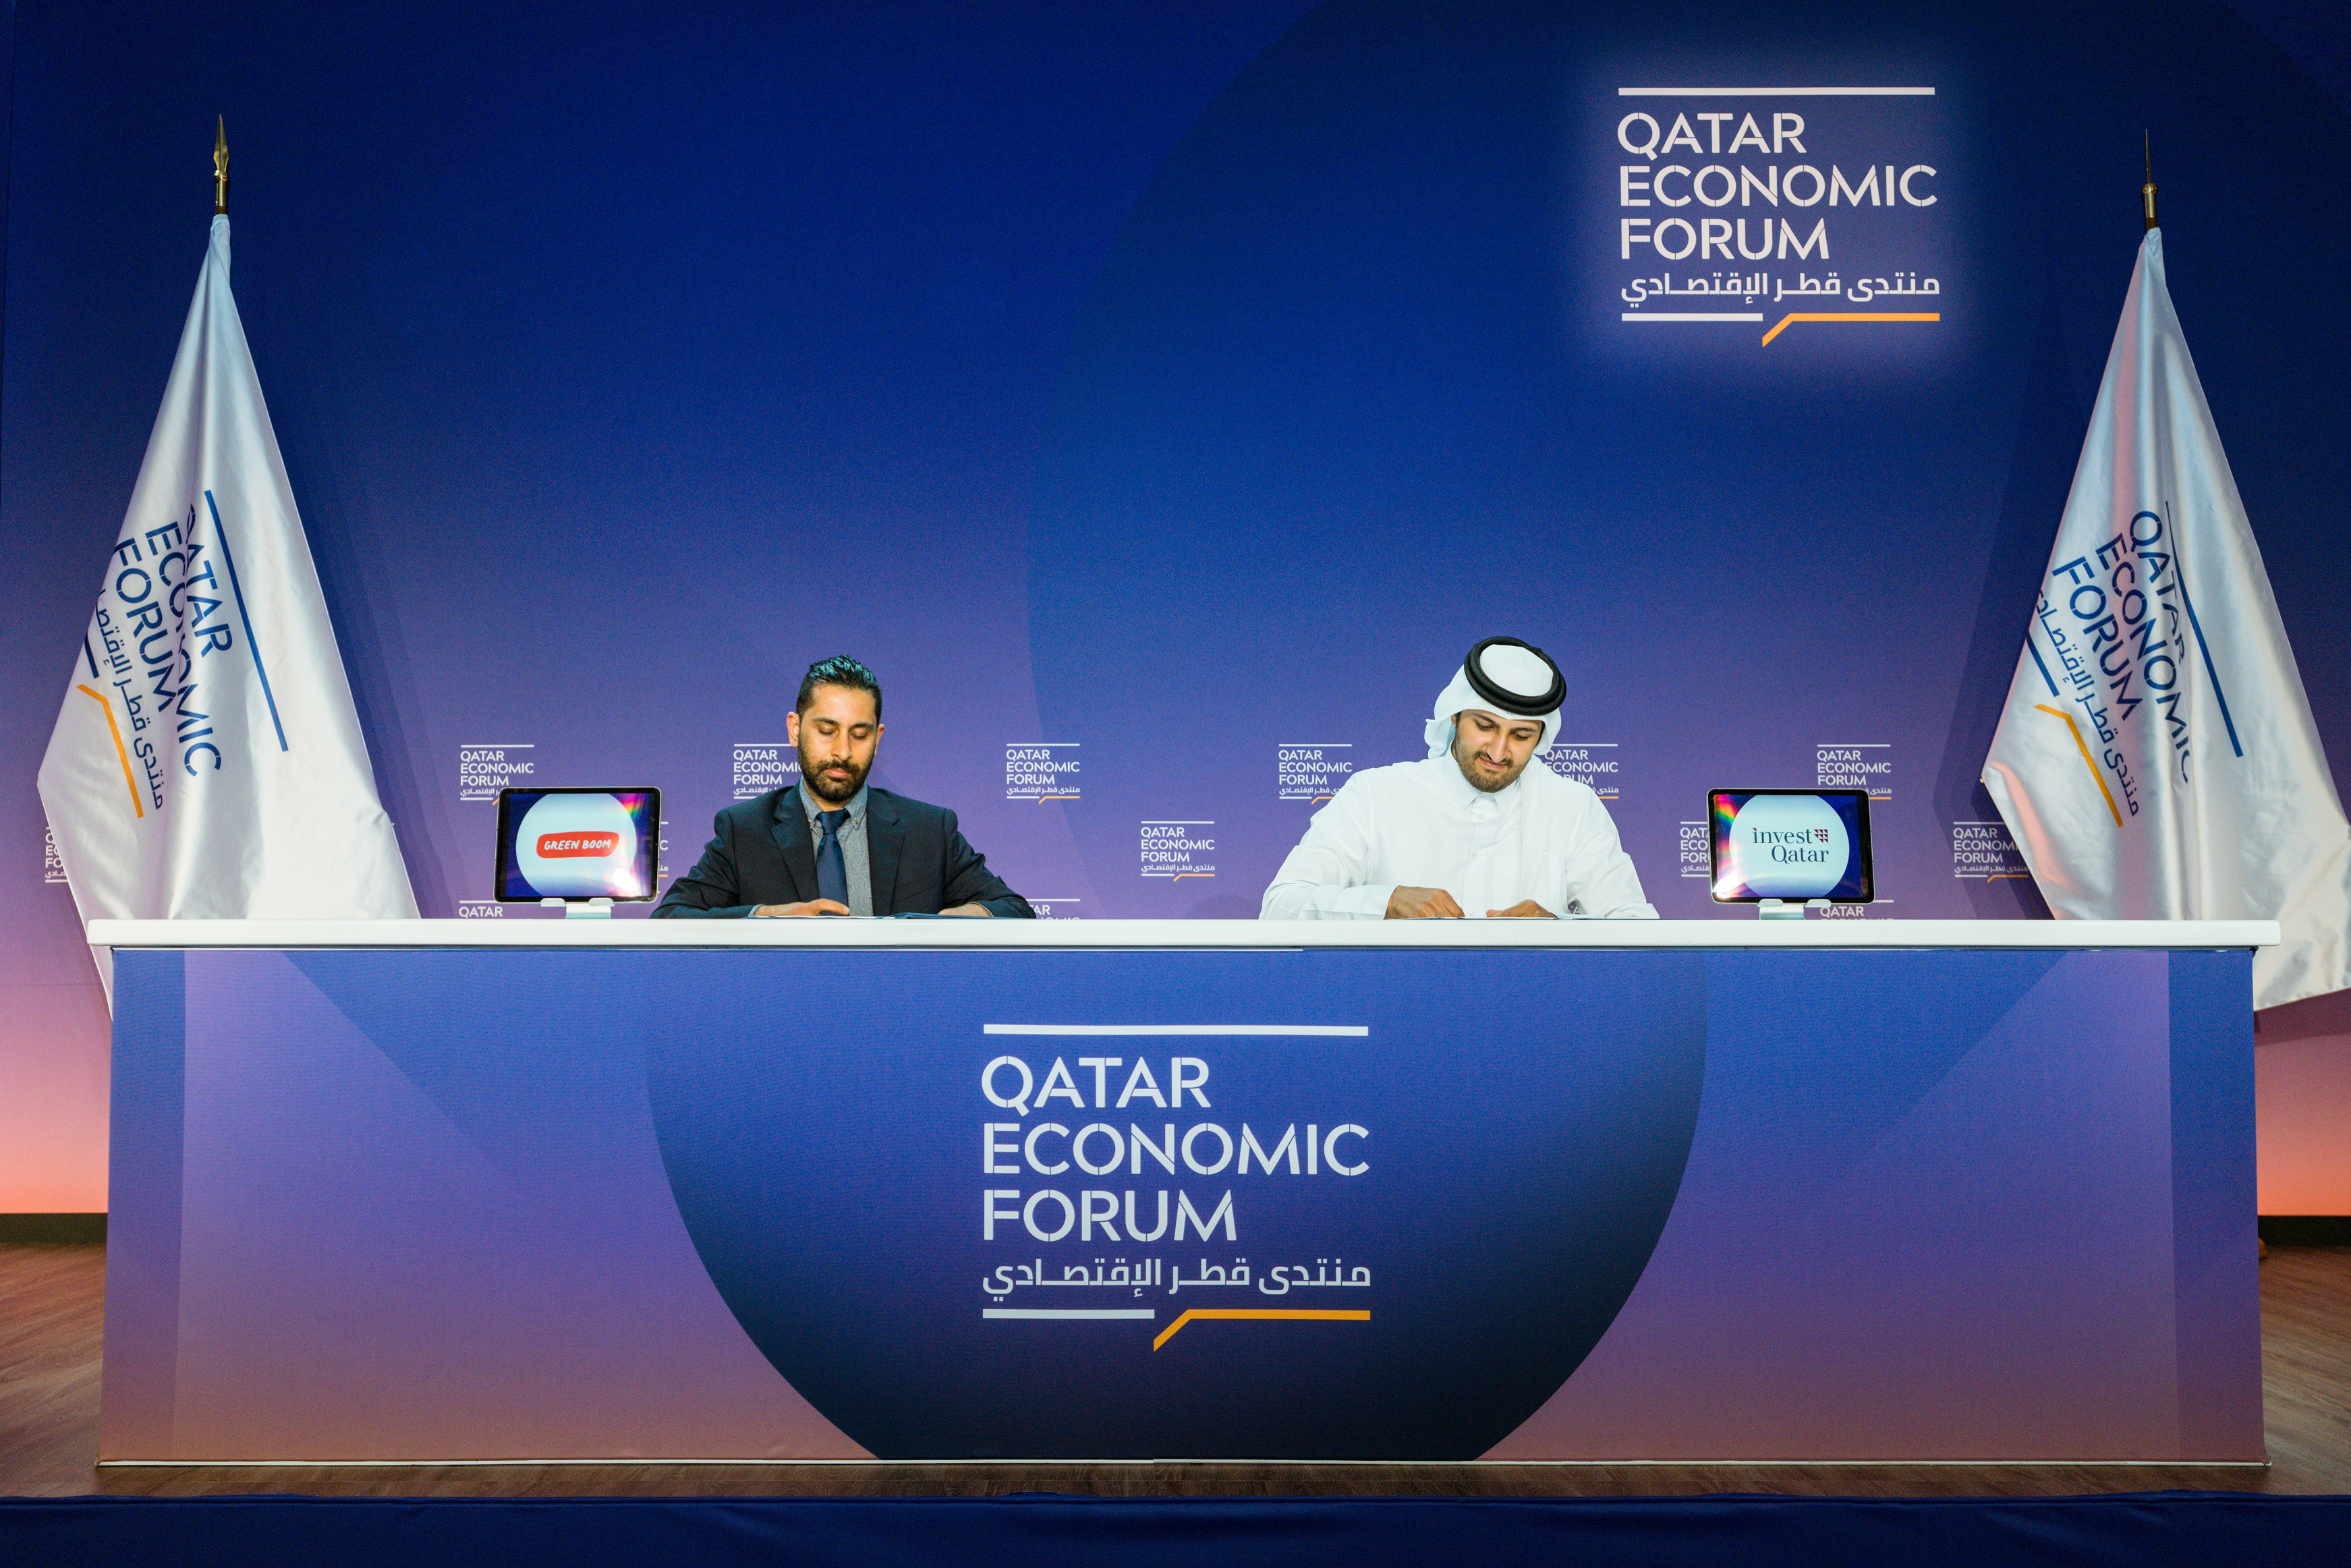 IPA Qatar signs investment dealswith Green Boom and PricewaterhouseCoopers at Qatar Economic Forum